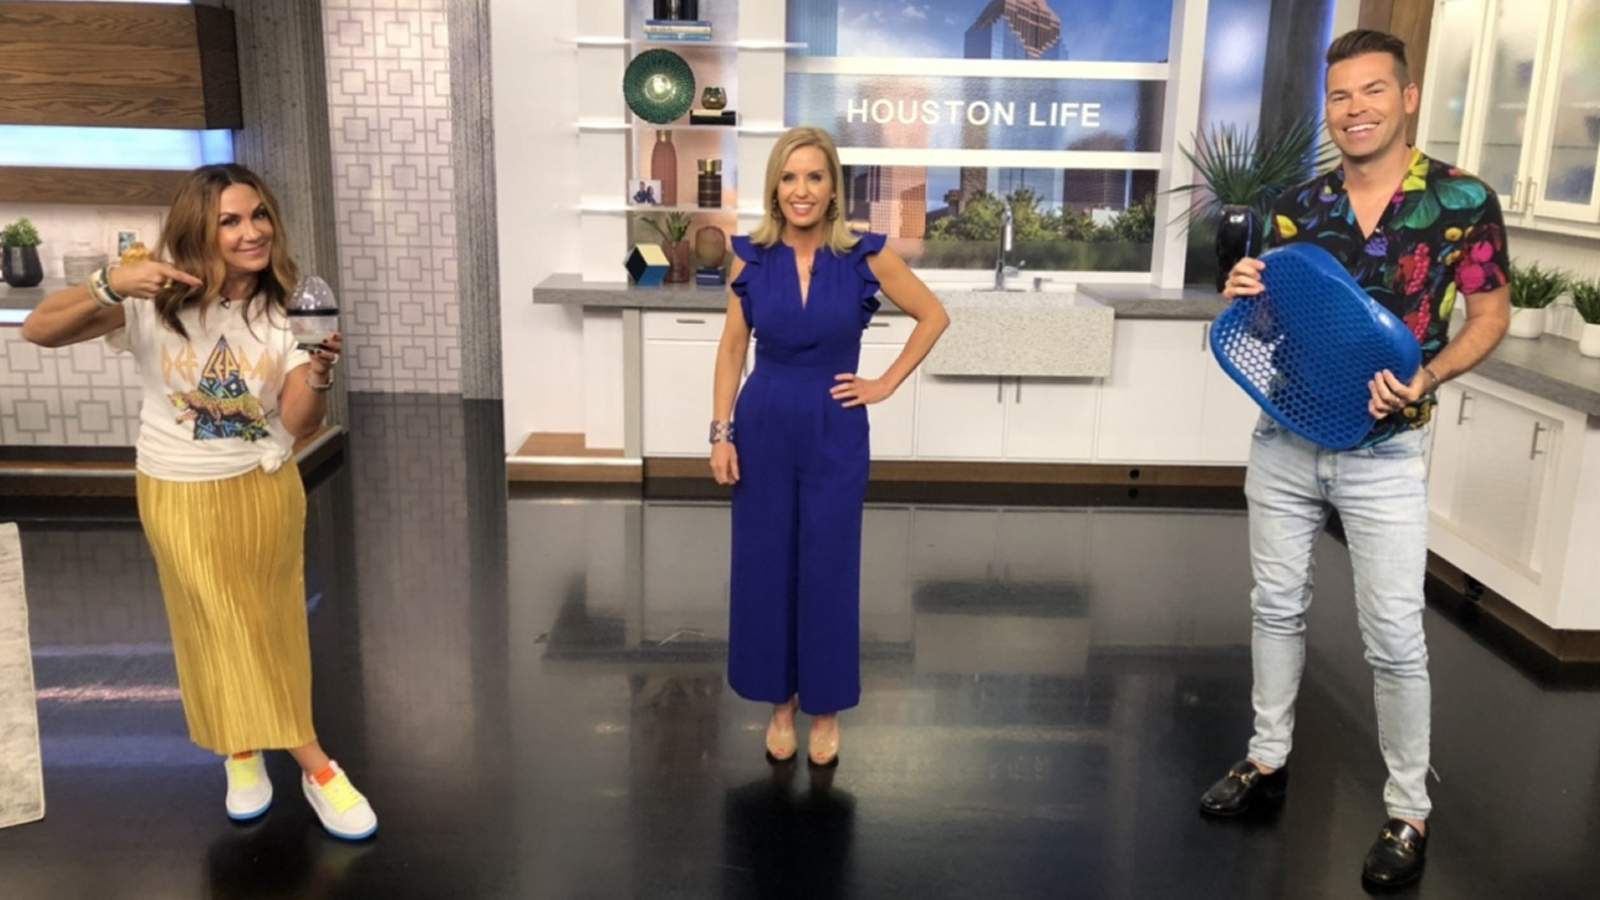 Thumbs up or down? KPRC 2’s Amy Davis gets Courtney and Derrick in on the ‘Test it Tuesday’ fun